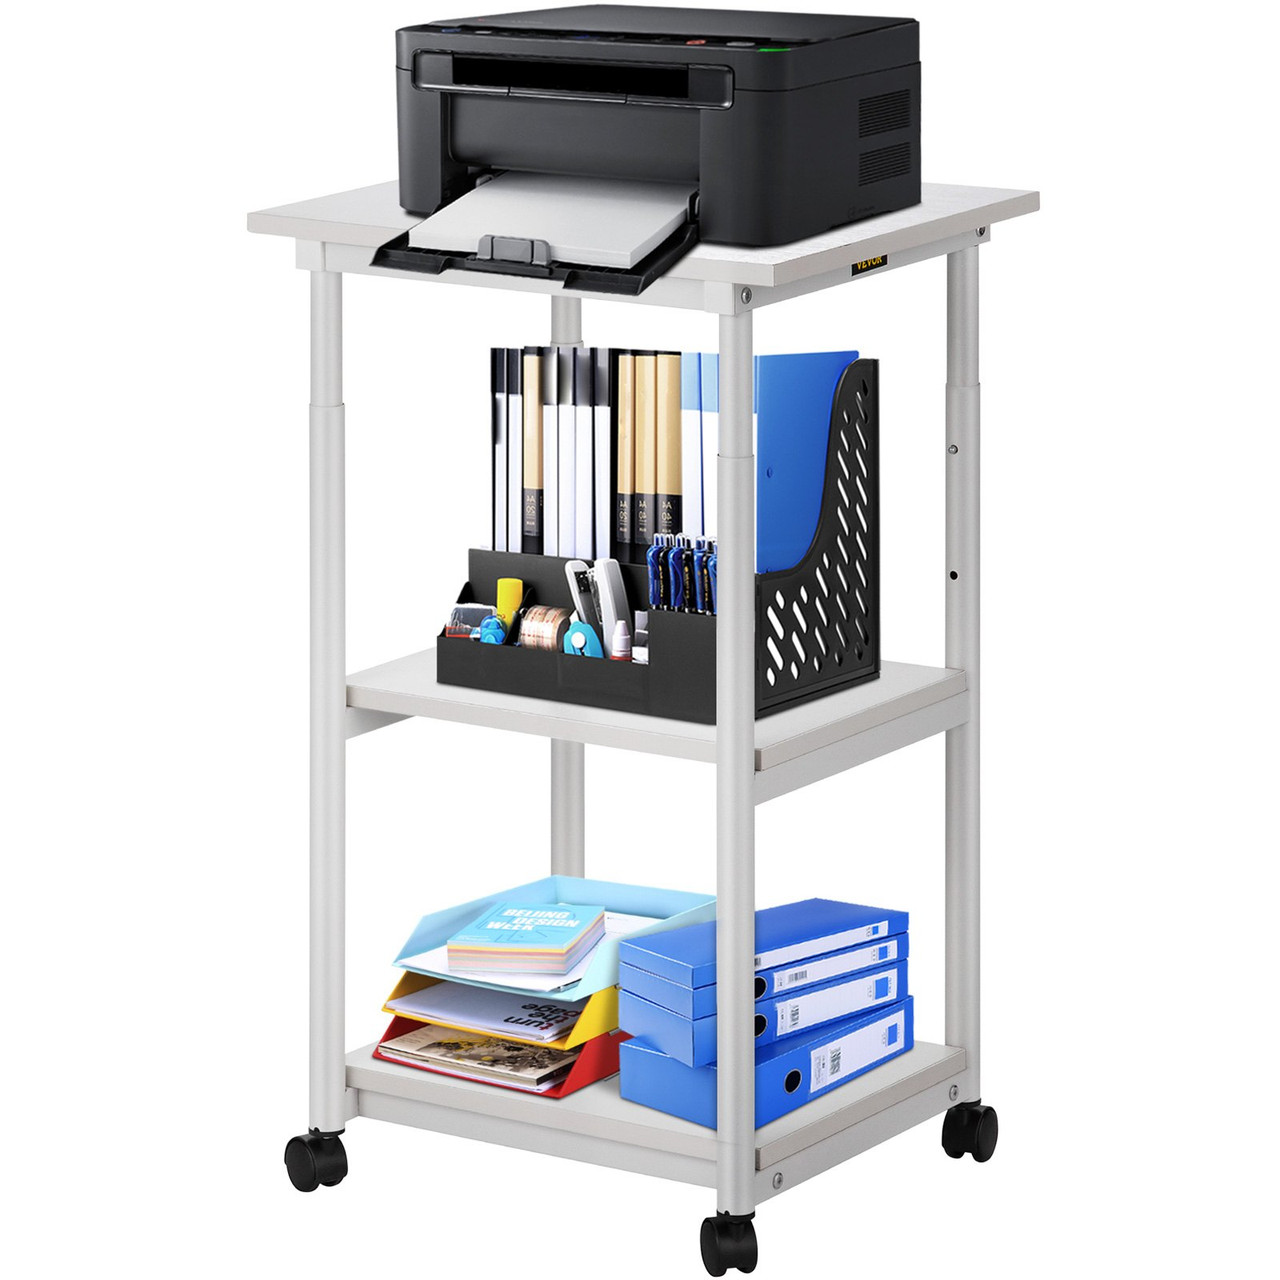 Printer Stand, 3 Tiers, Rolling Machine Cart with Adjustable Shelf & Lockable Wheels, Mobile Printer Table for Fax Scanner File Book in Home Office, 18.9 x 15.35 x 30.31 inch, White